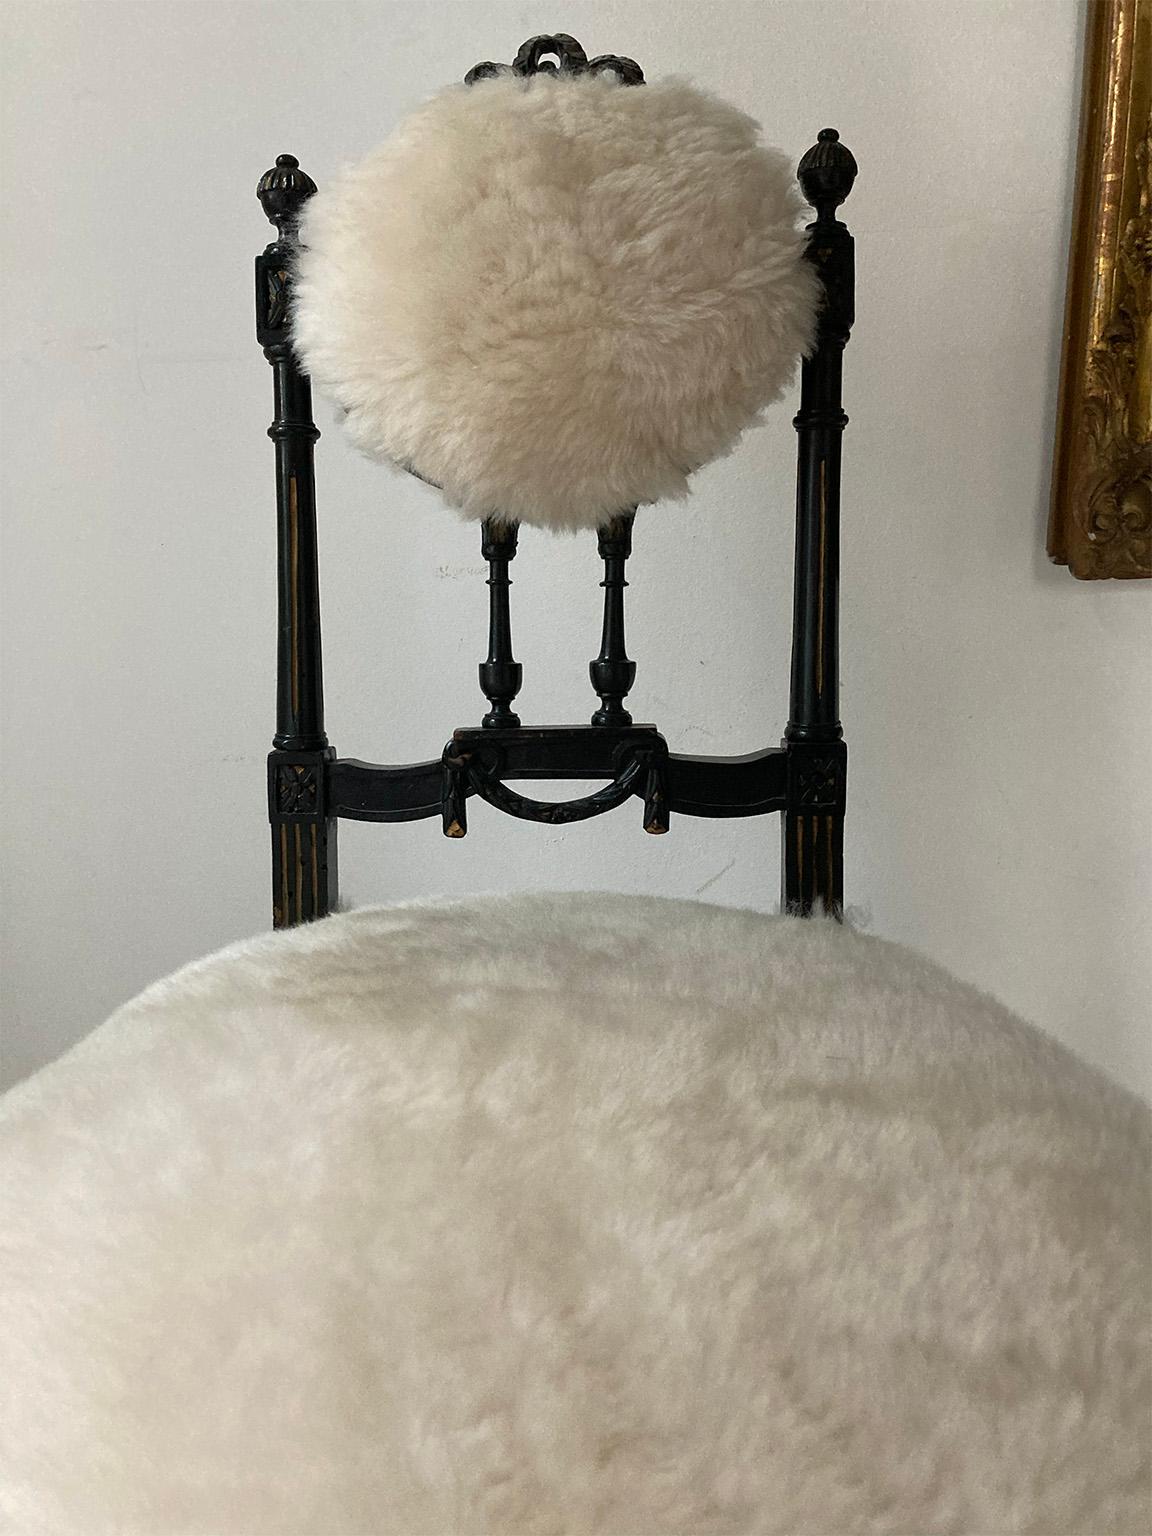 Turned Fine Pair of Decorative Black Chairs with White Pure Wool , Sicily Italy 1920’s For Sale